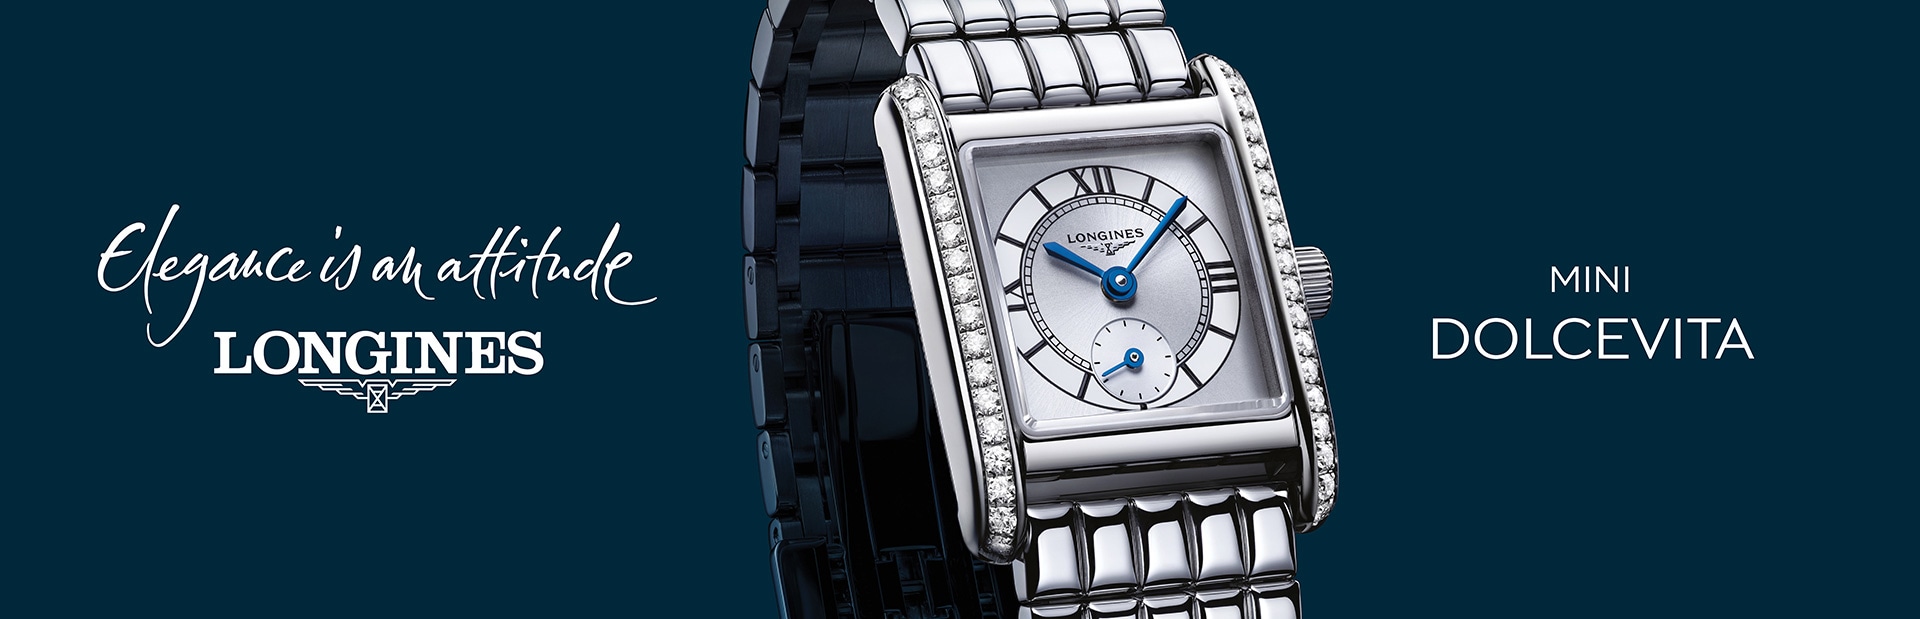 Luxury Watches USA - Shop High End Timepieces Online